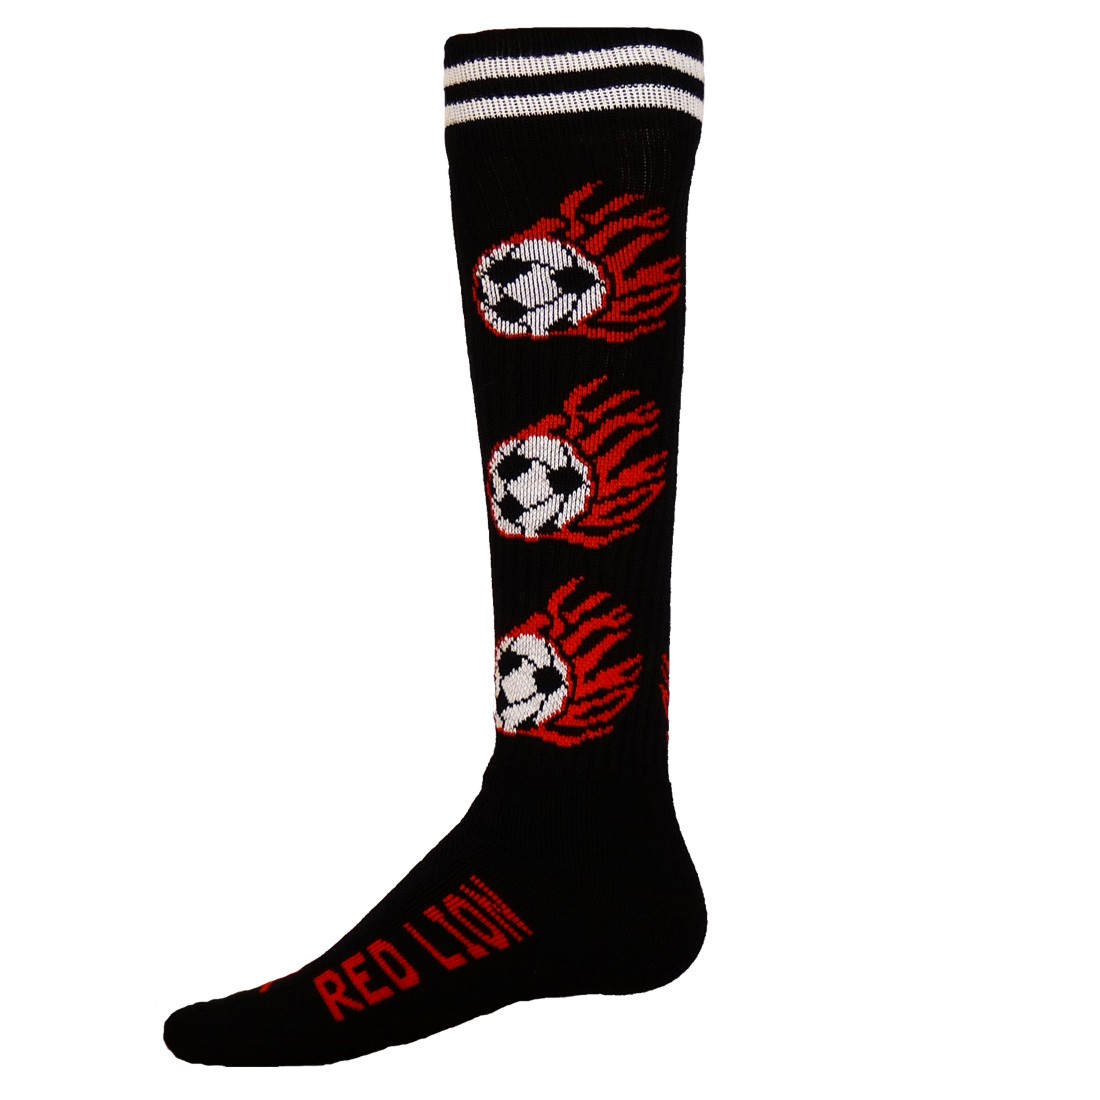 These Crazy Soccer Socks will Have your Feet on Fire!